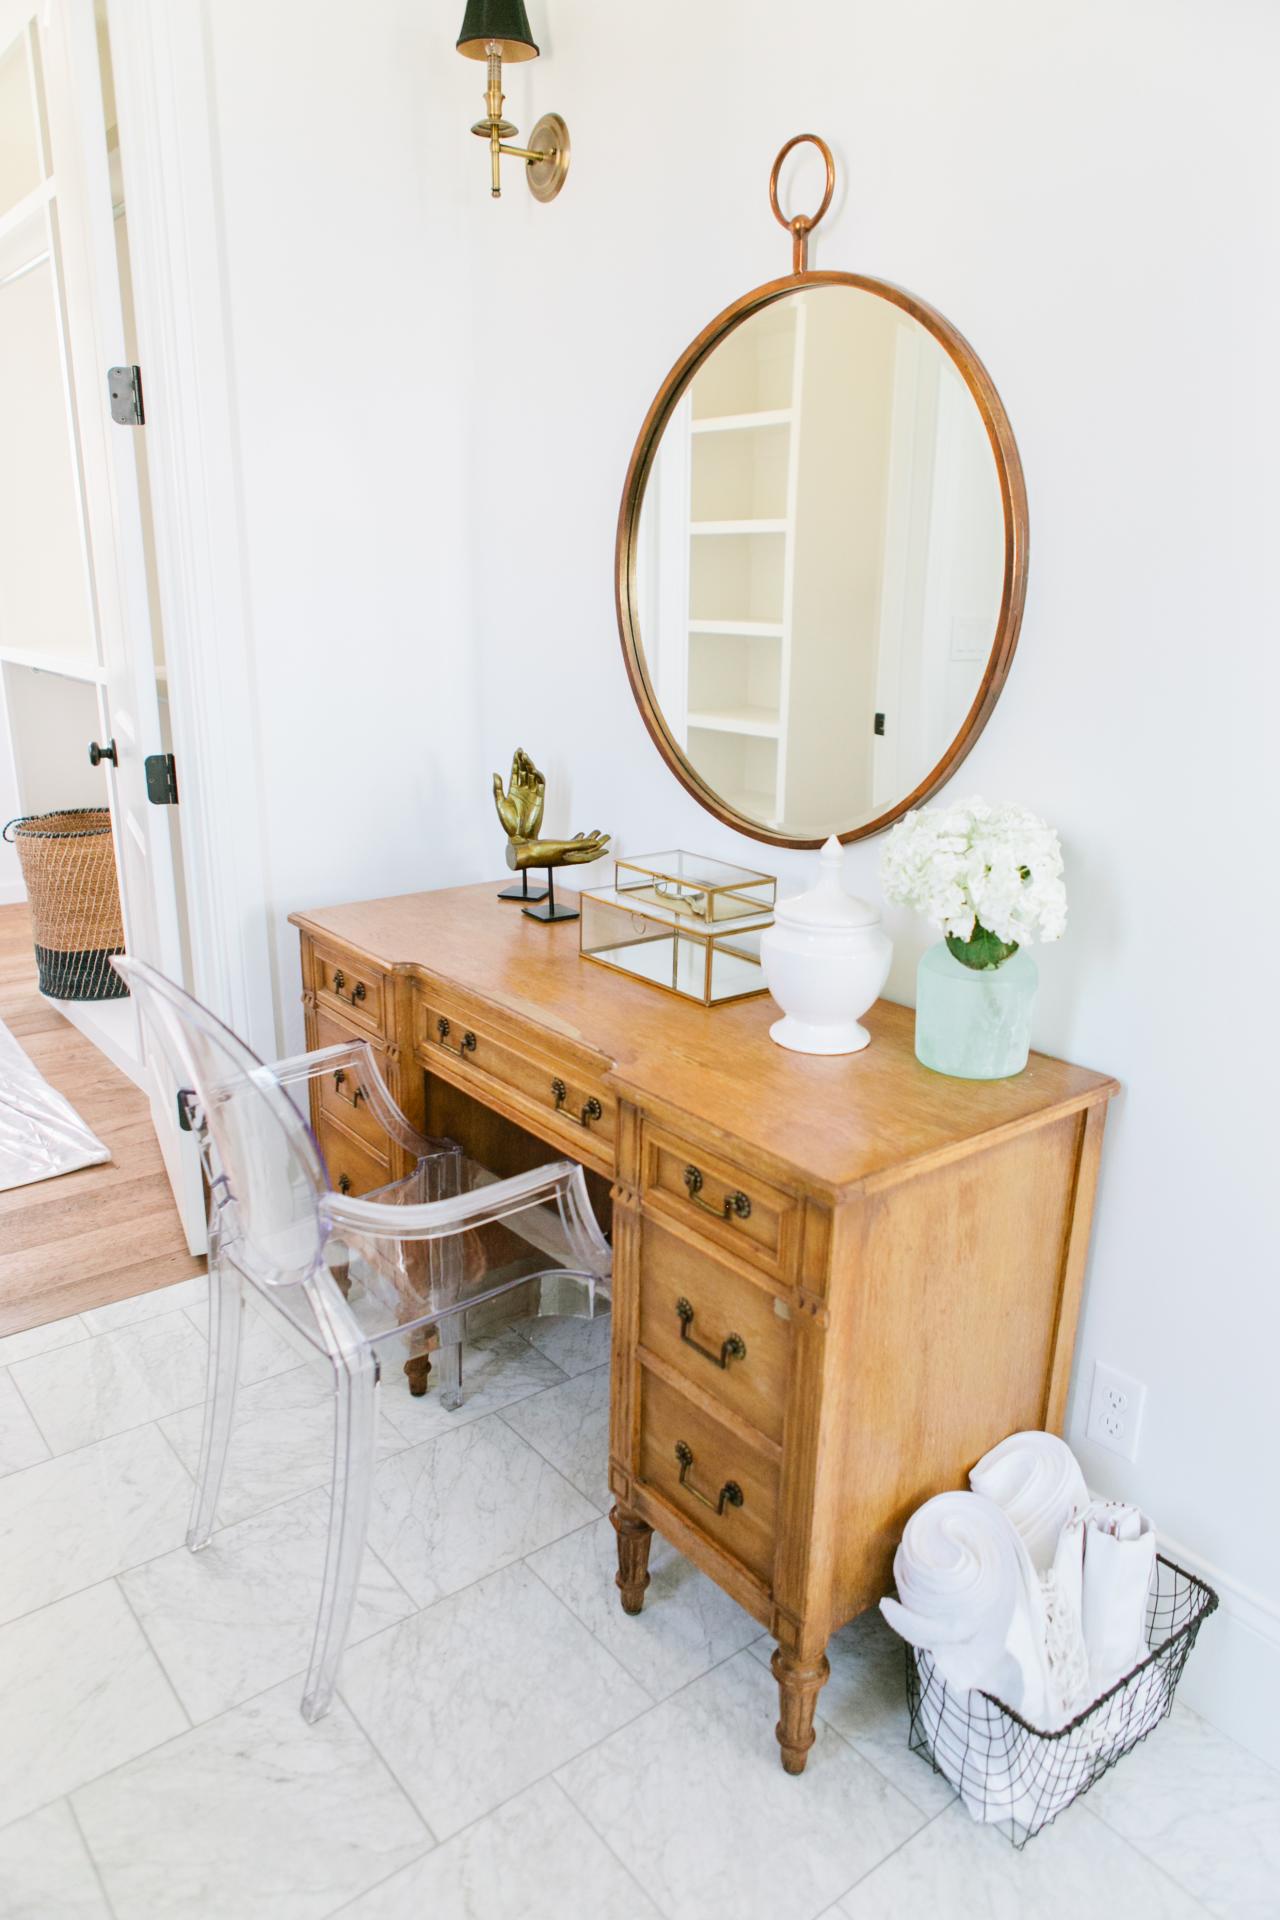 7 Tips for Organizing & Dressing Up Your Vanity | HGTV's Decorating ...